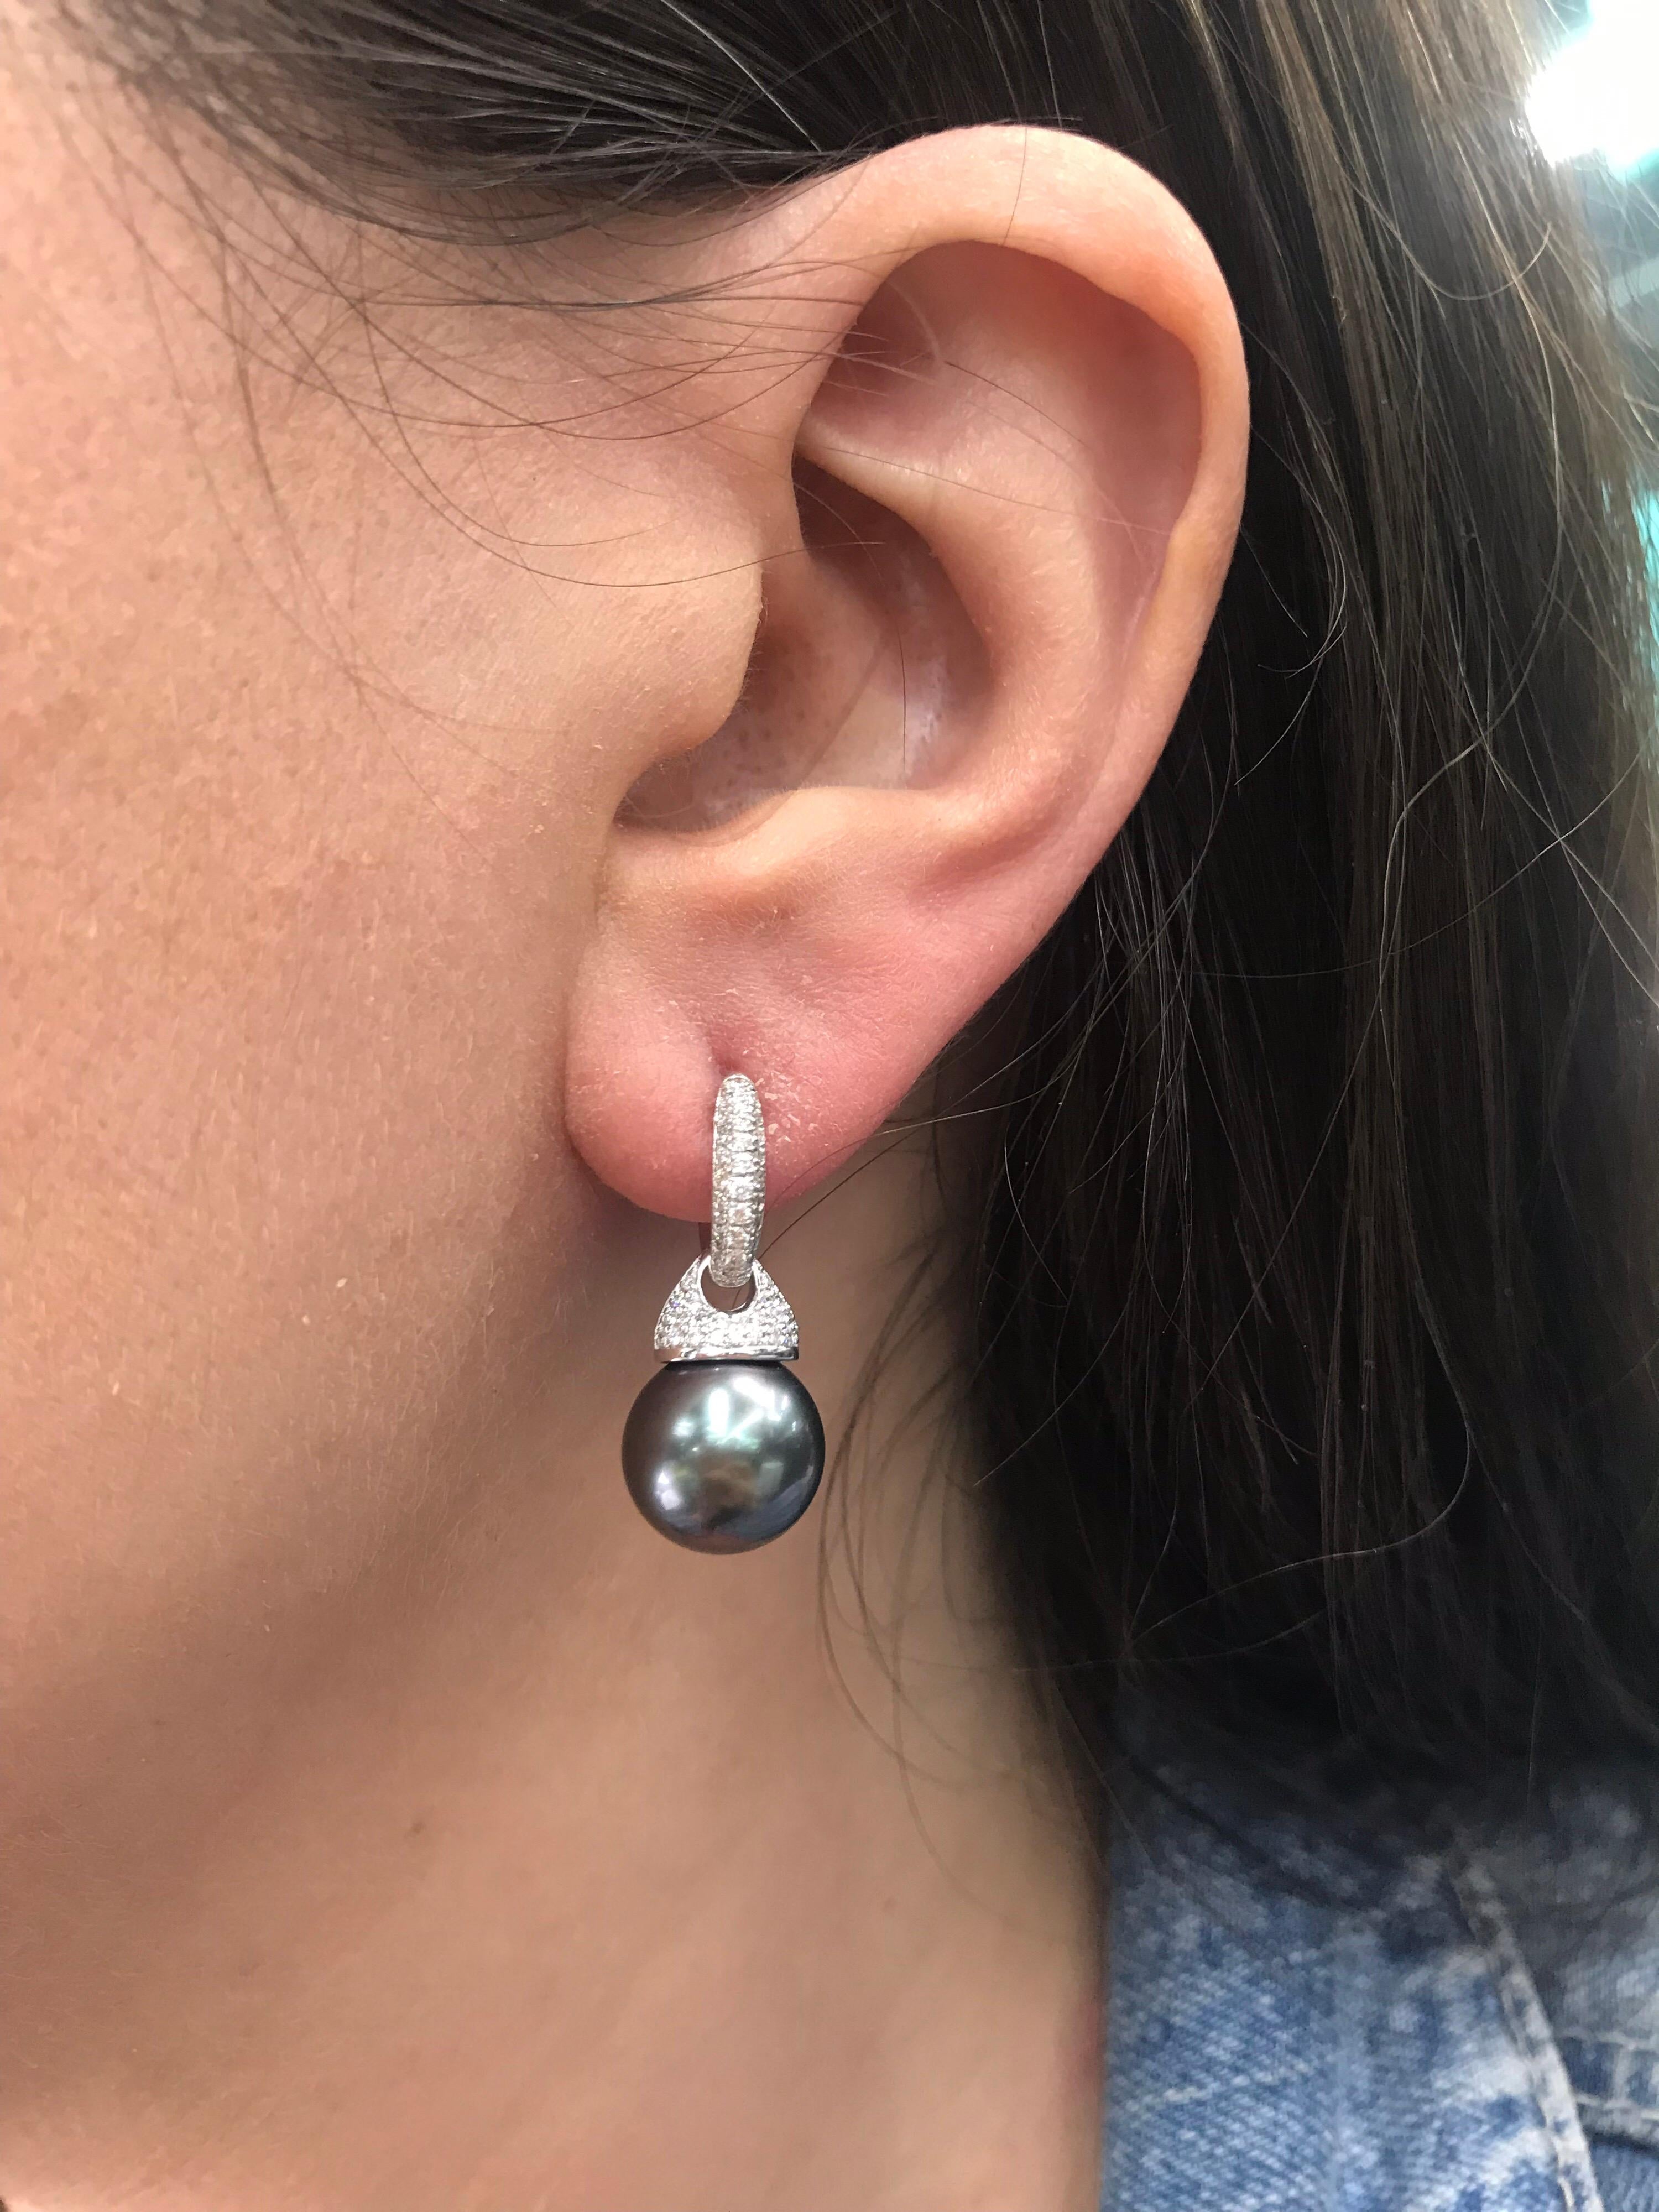 14K White gold drop earrings featuring two Tahitian Pearls measuring 10-11 mm flanked with round brilliants weighing 0.44 carats. 
Can be worn as a huggie earring